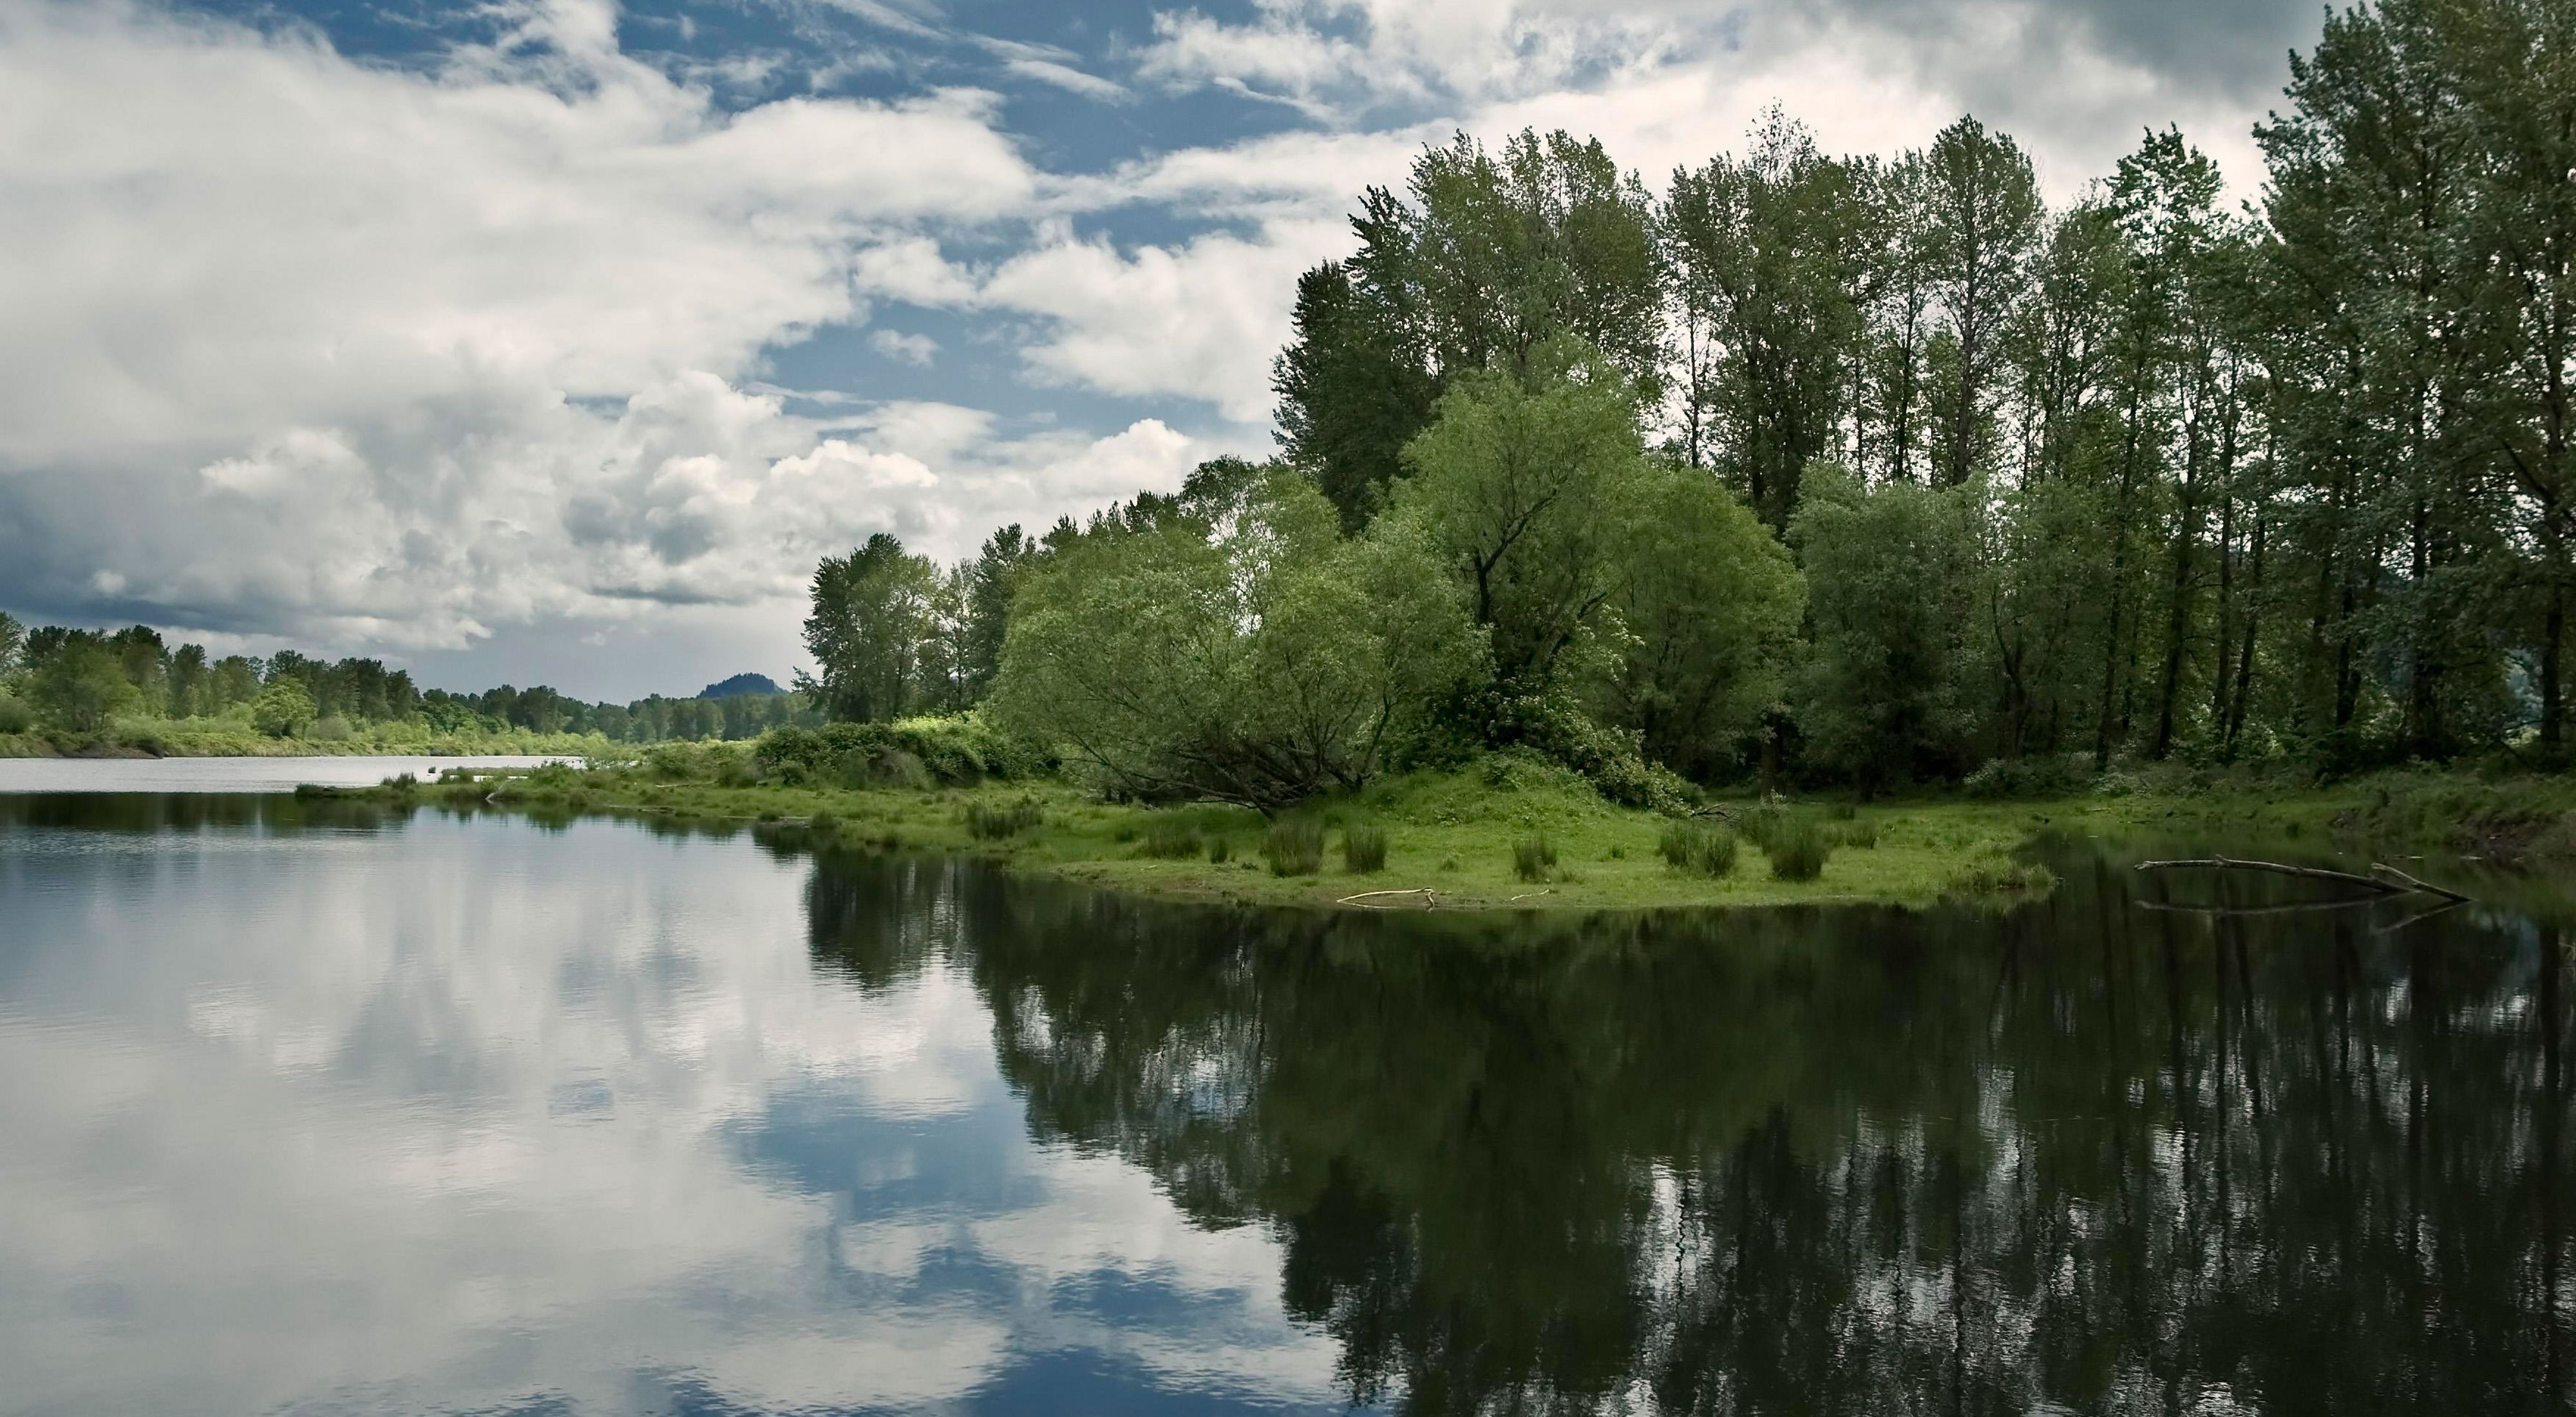 With extensive habitats increasingly endangered in Oregon's Willamette Valley, the Willamette Confluence project includes six miles of river corridor, floodplain forest, wetlands, upland oak woodlands and native prairie.